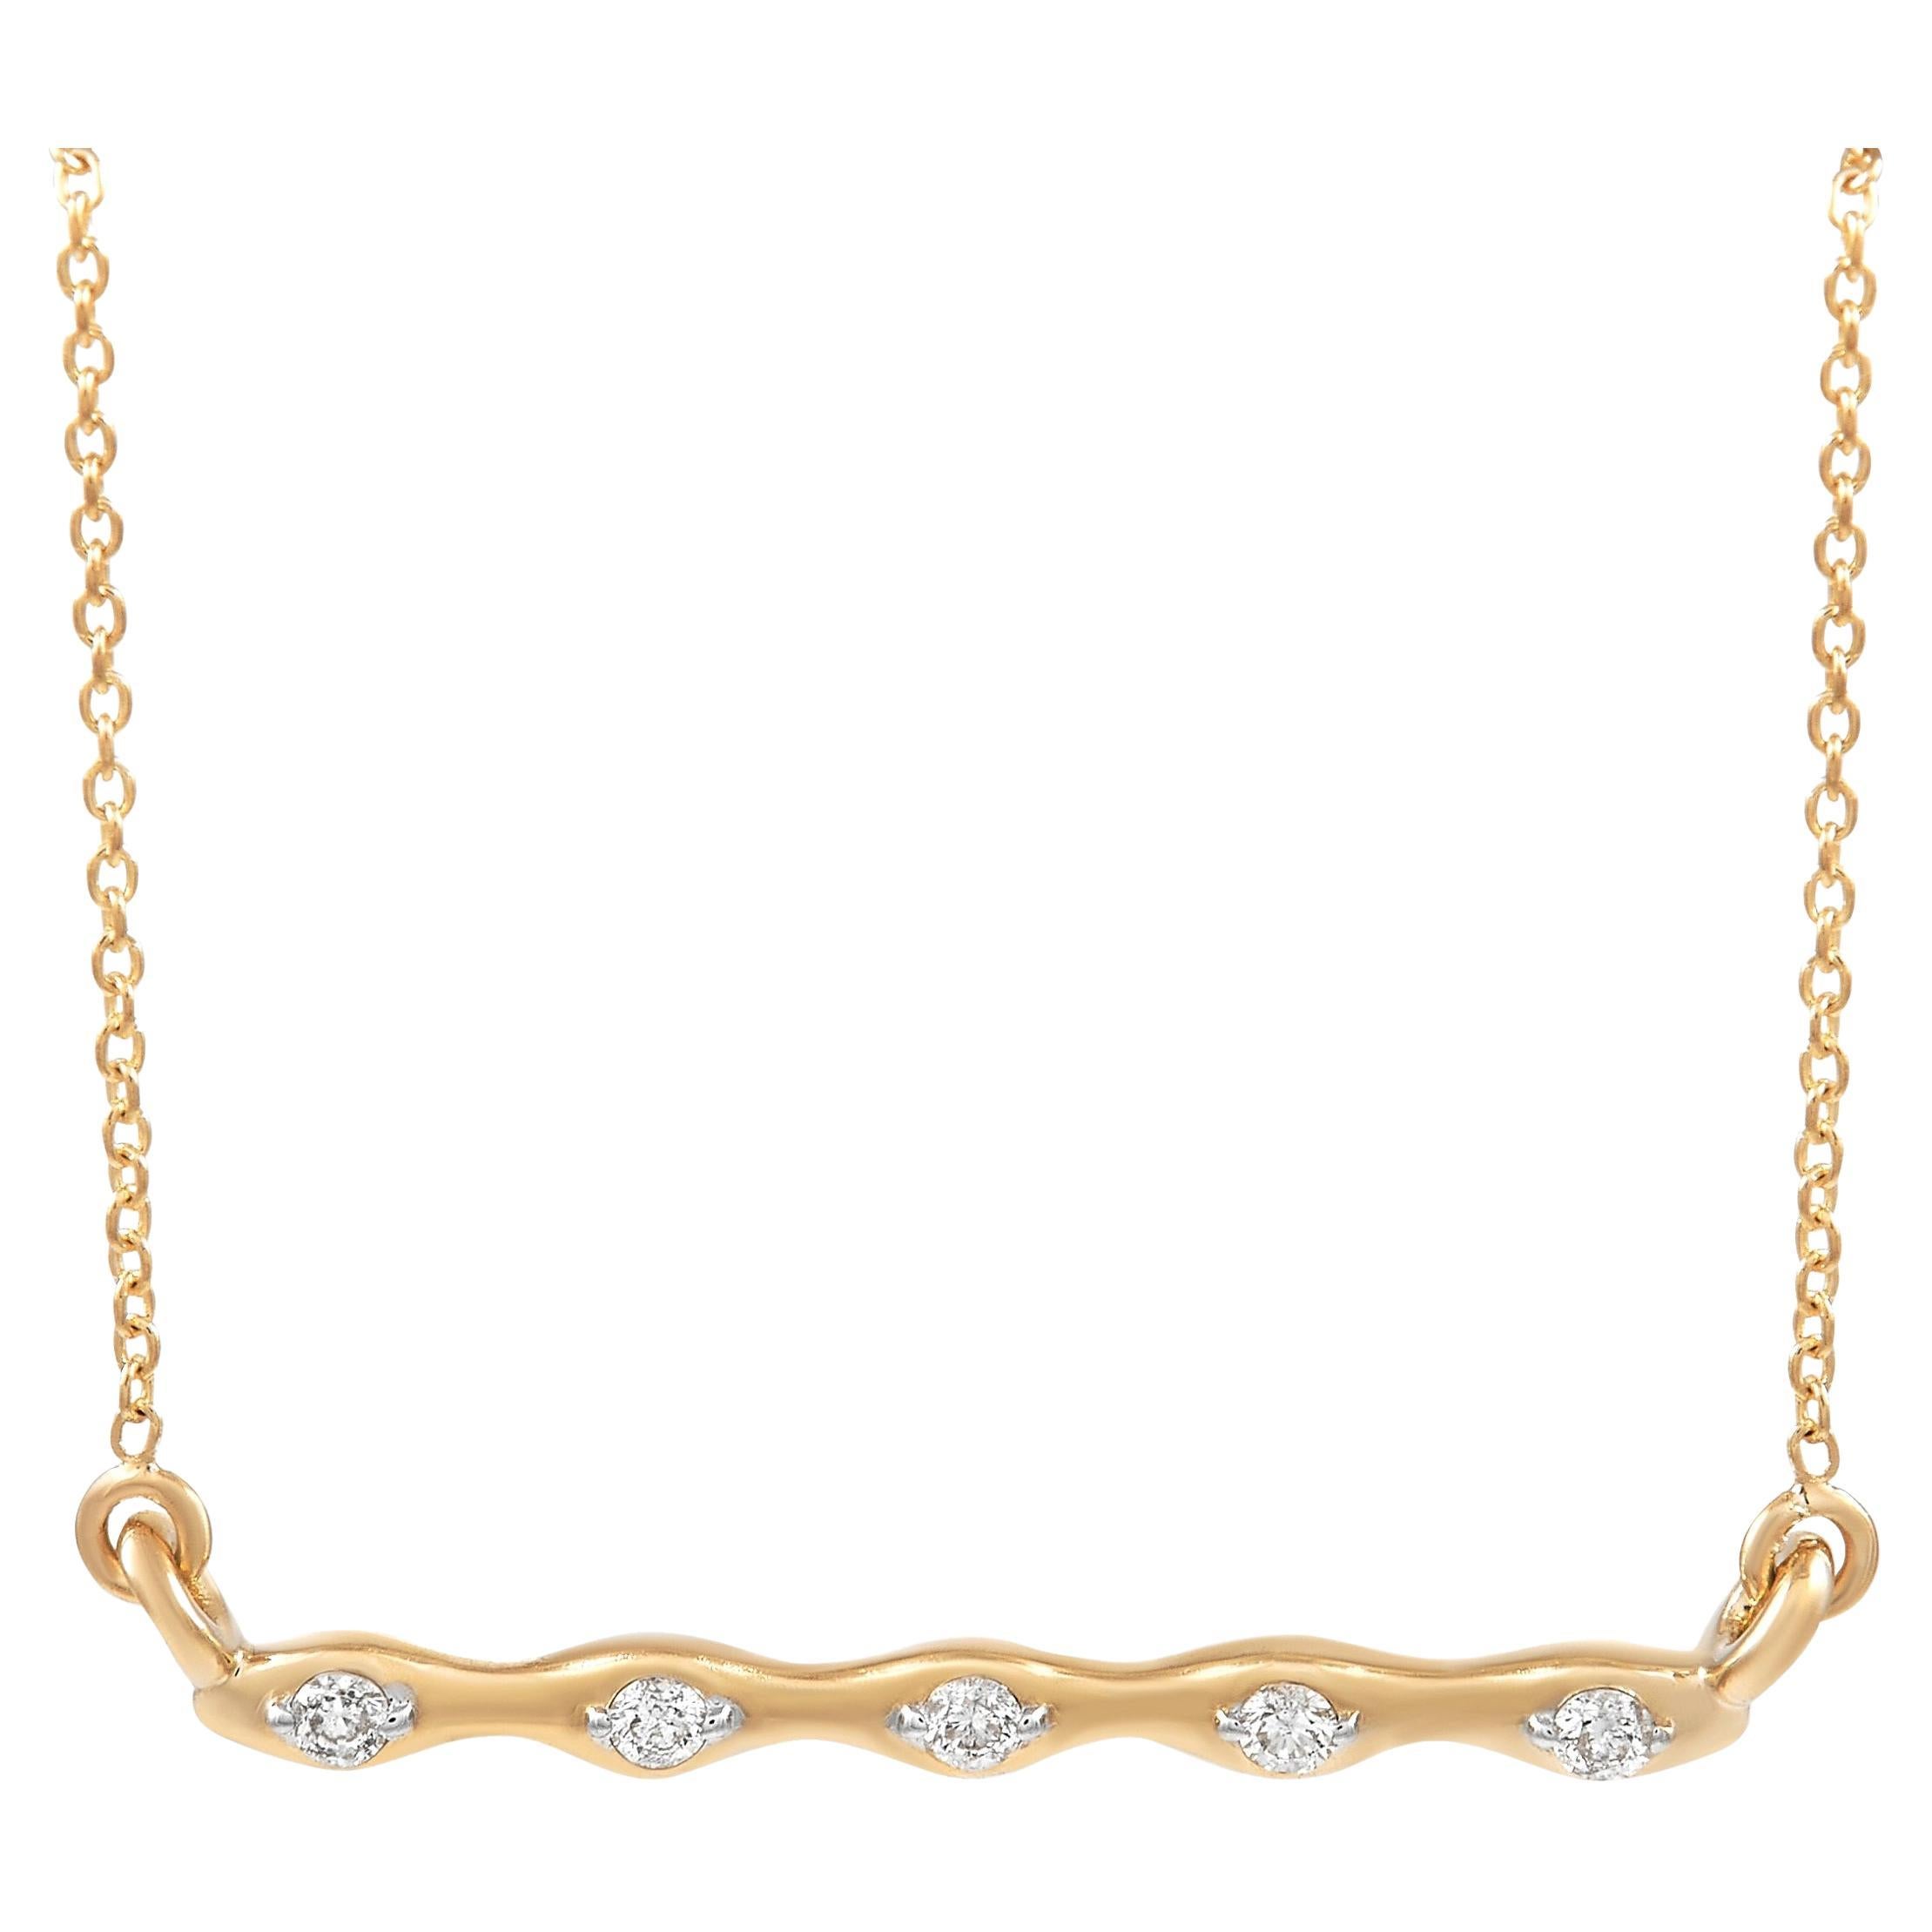 LB Exclusive 14K Yellow Gold 0.06 Ct Diamond Necklace For Sale